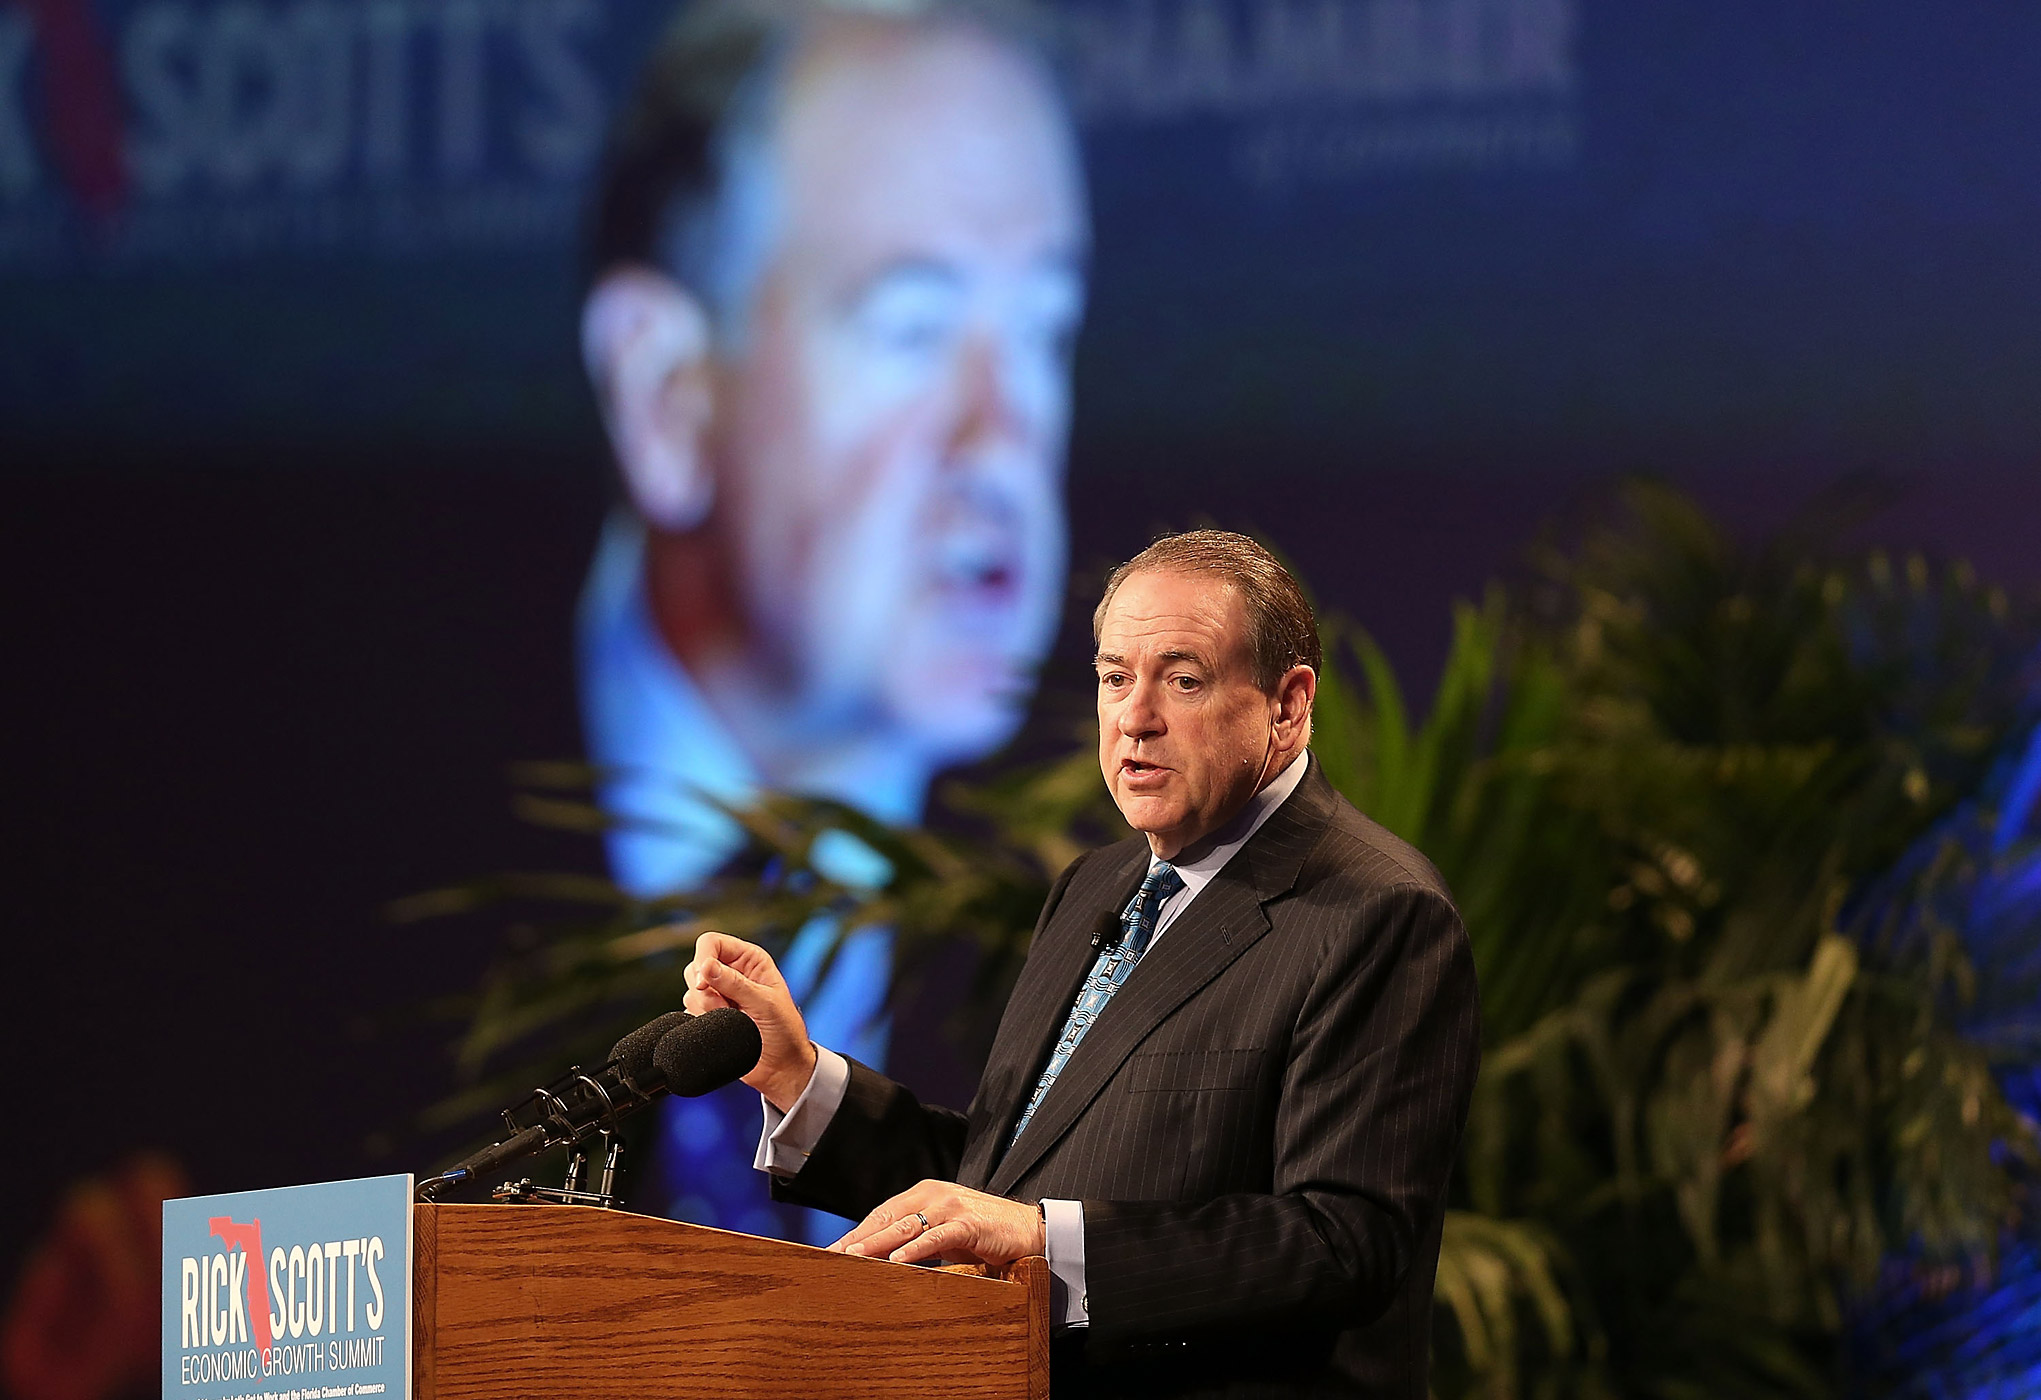 Former Arkansas Governor Mike Huckabee speaks during Rick Scott's Economic Growth Summit held at Disney's Yacht and Beach Club Convention Center on June 2, 2015 in Orlando, Fla. (Joe Raedle—Getty Images)